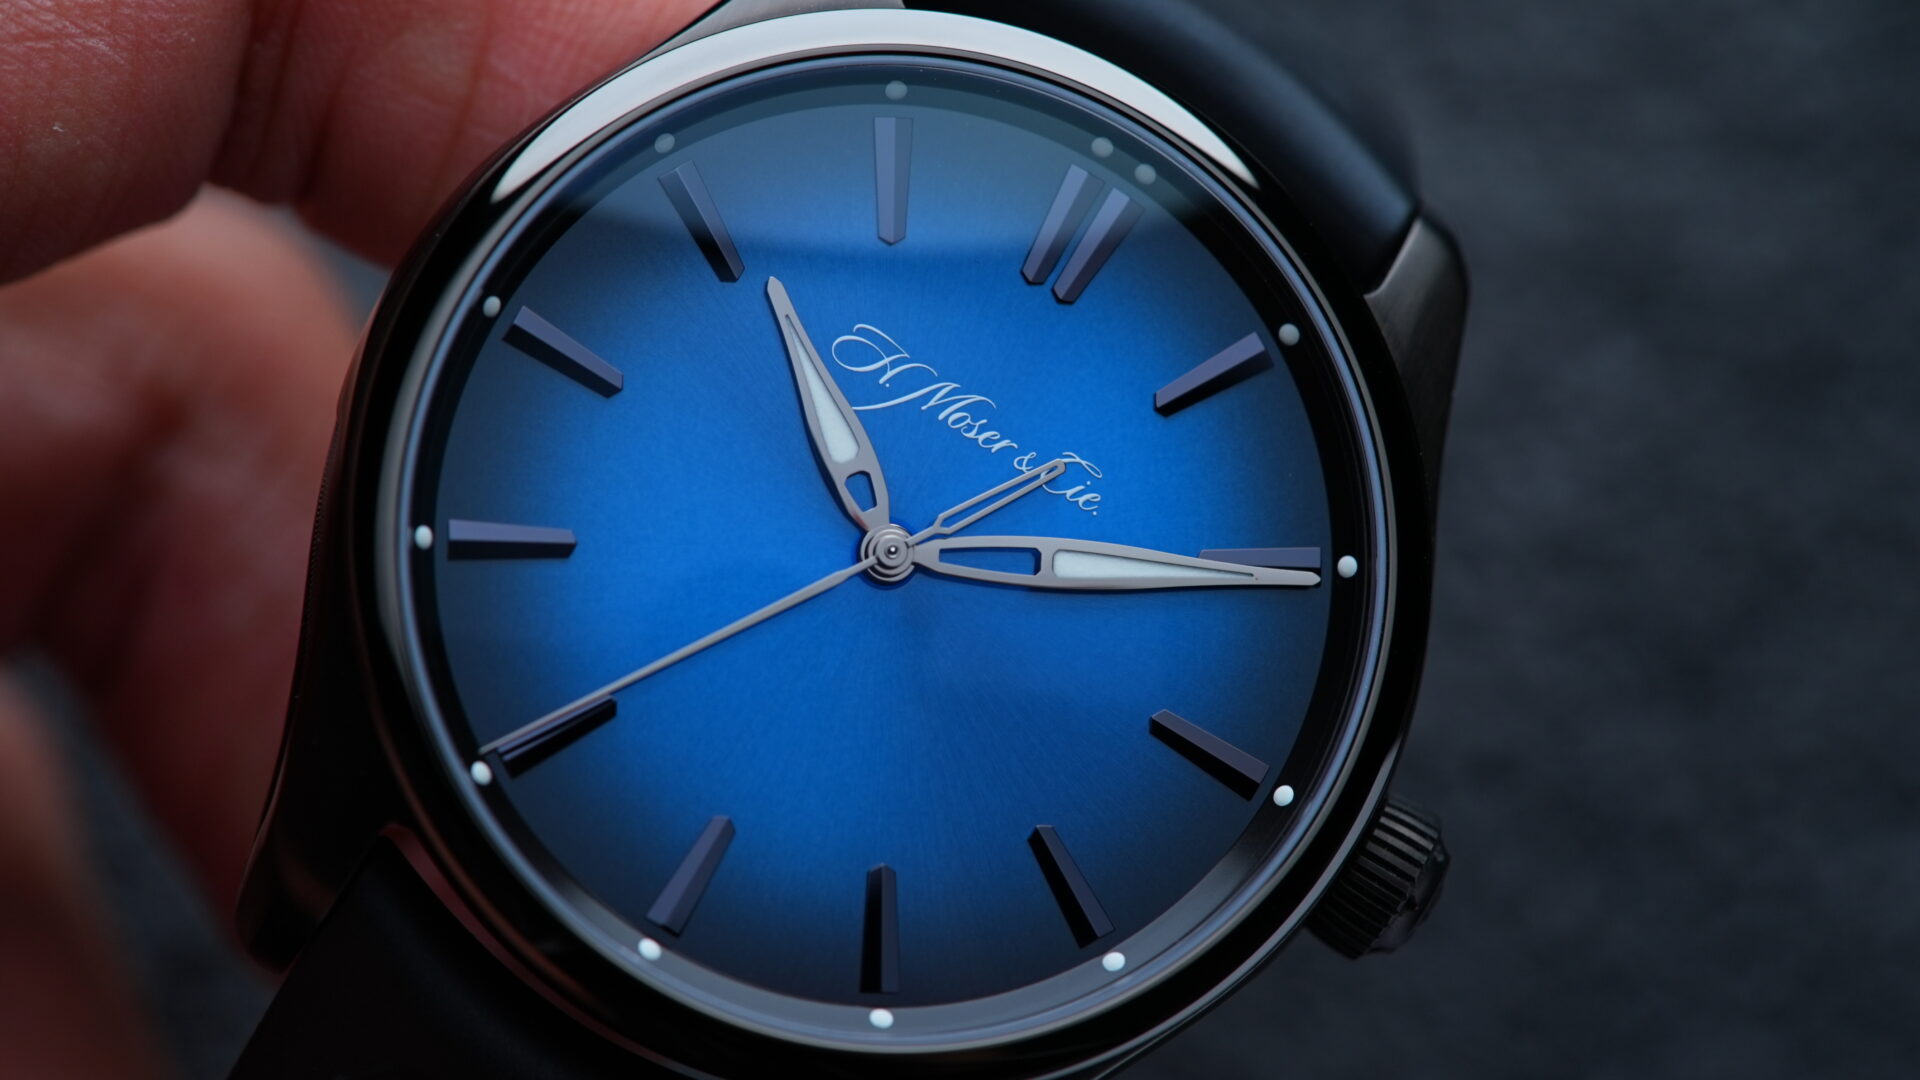 H.Moser & Cie. Pioneer Centre Seconds Funky Blue Fumé Black watch being held in hand.